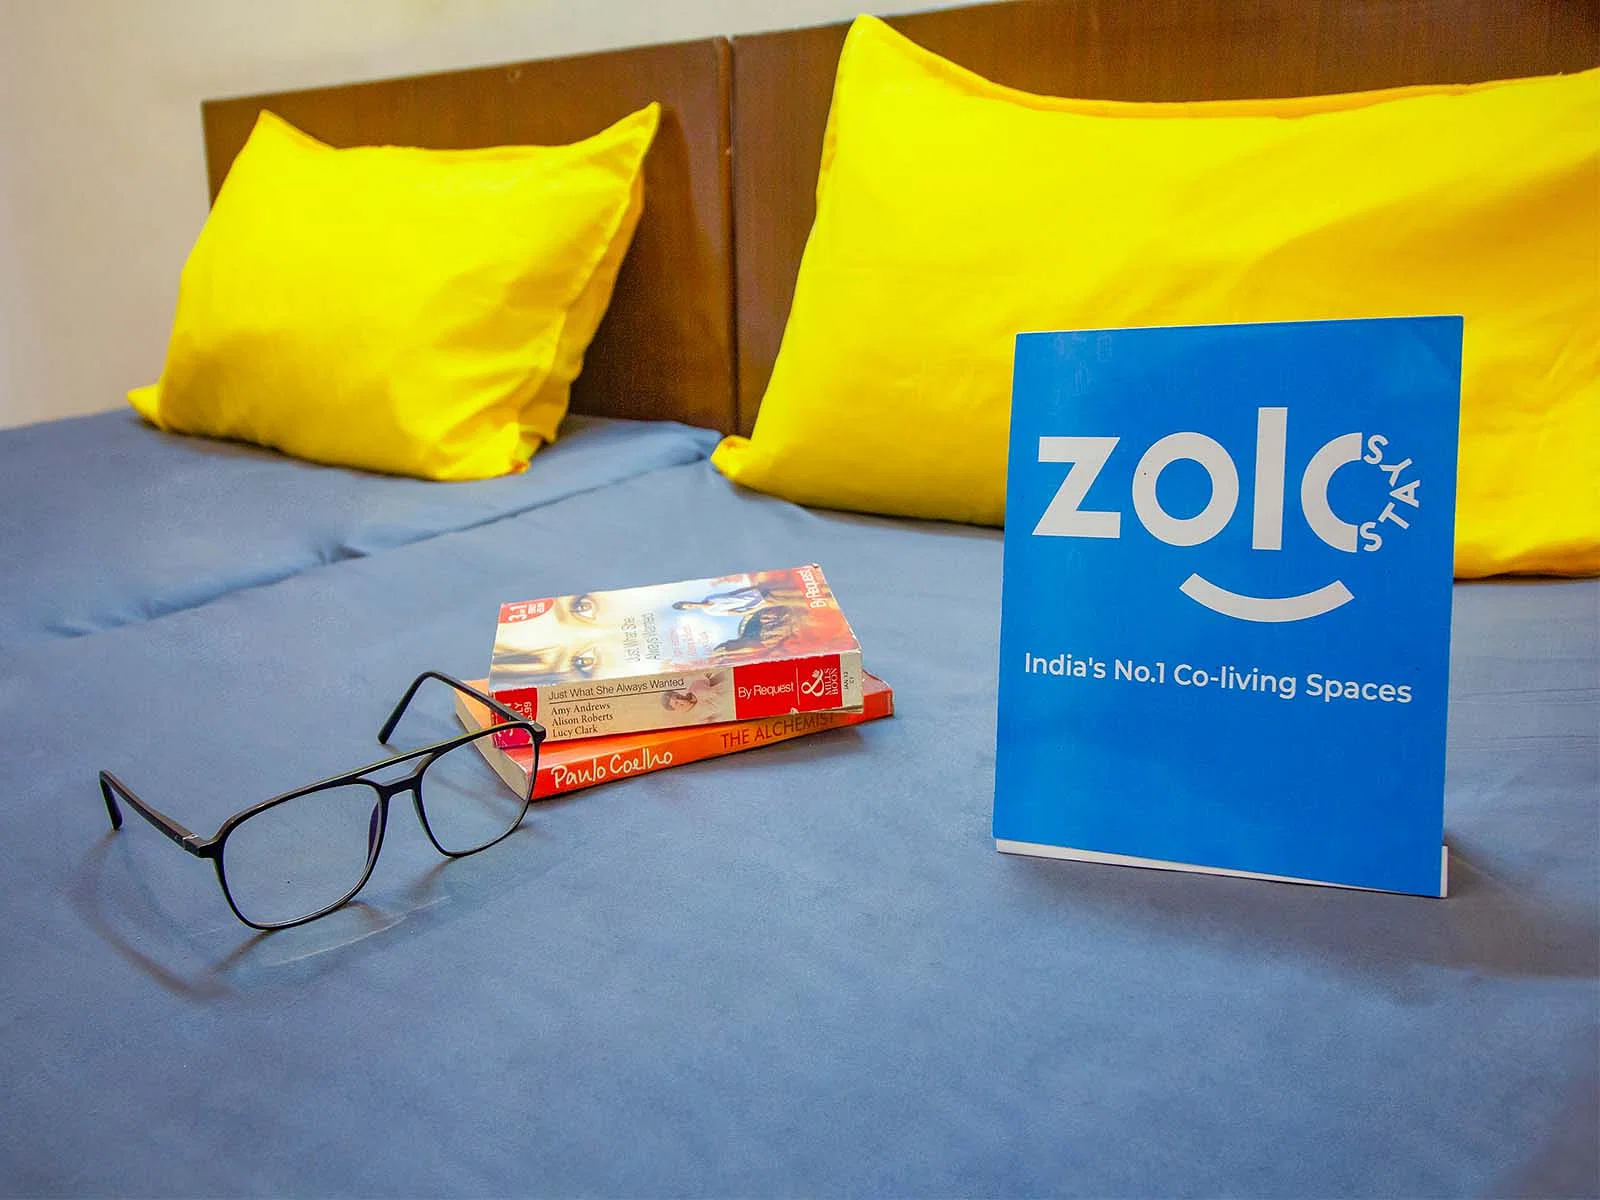 budget-friendly PGs and hostels for boys and girls with single rooms with daily hopusekeeping-Zolo Sun N Sand